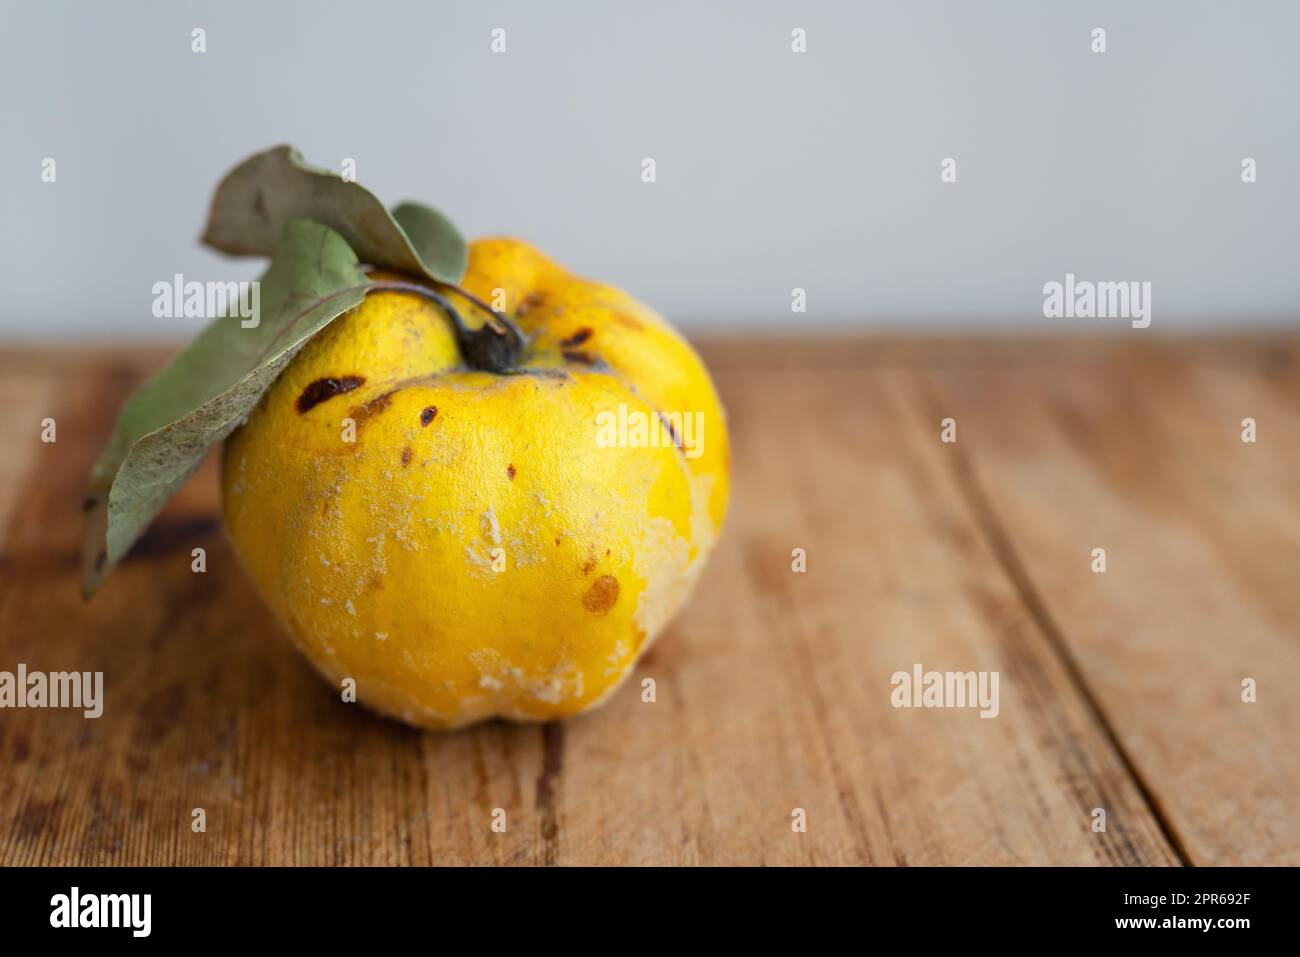 Imperfect apple quince on a wooden table. Yellow moldy quince apple with rot spots. Stock Photo